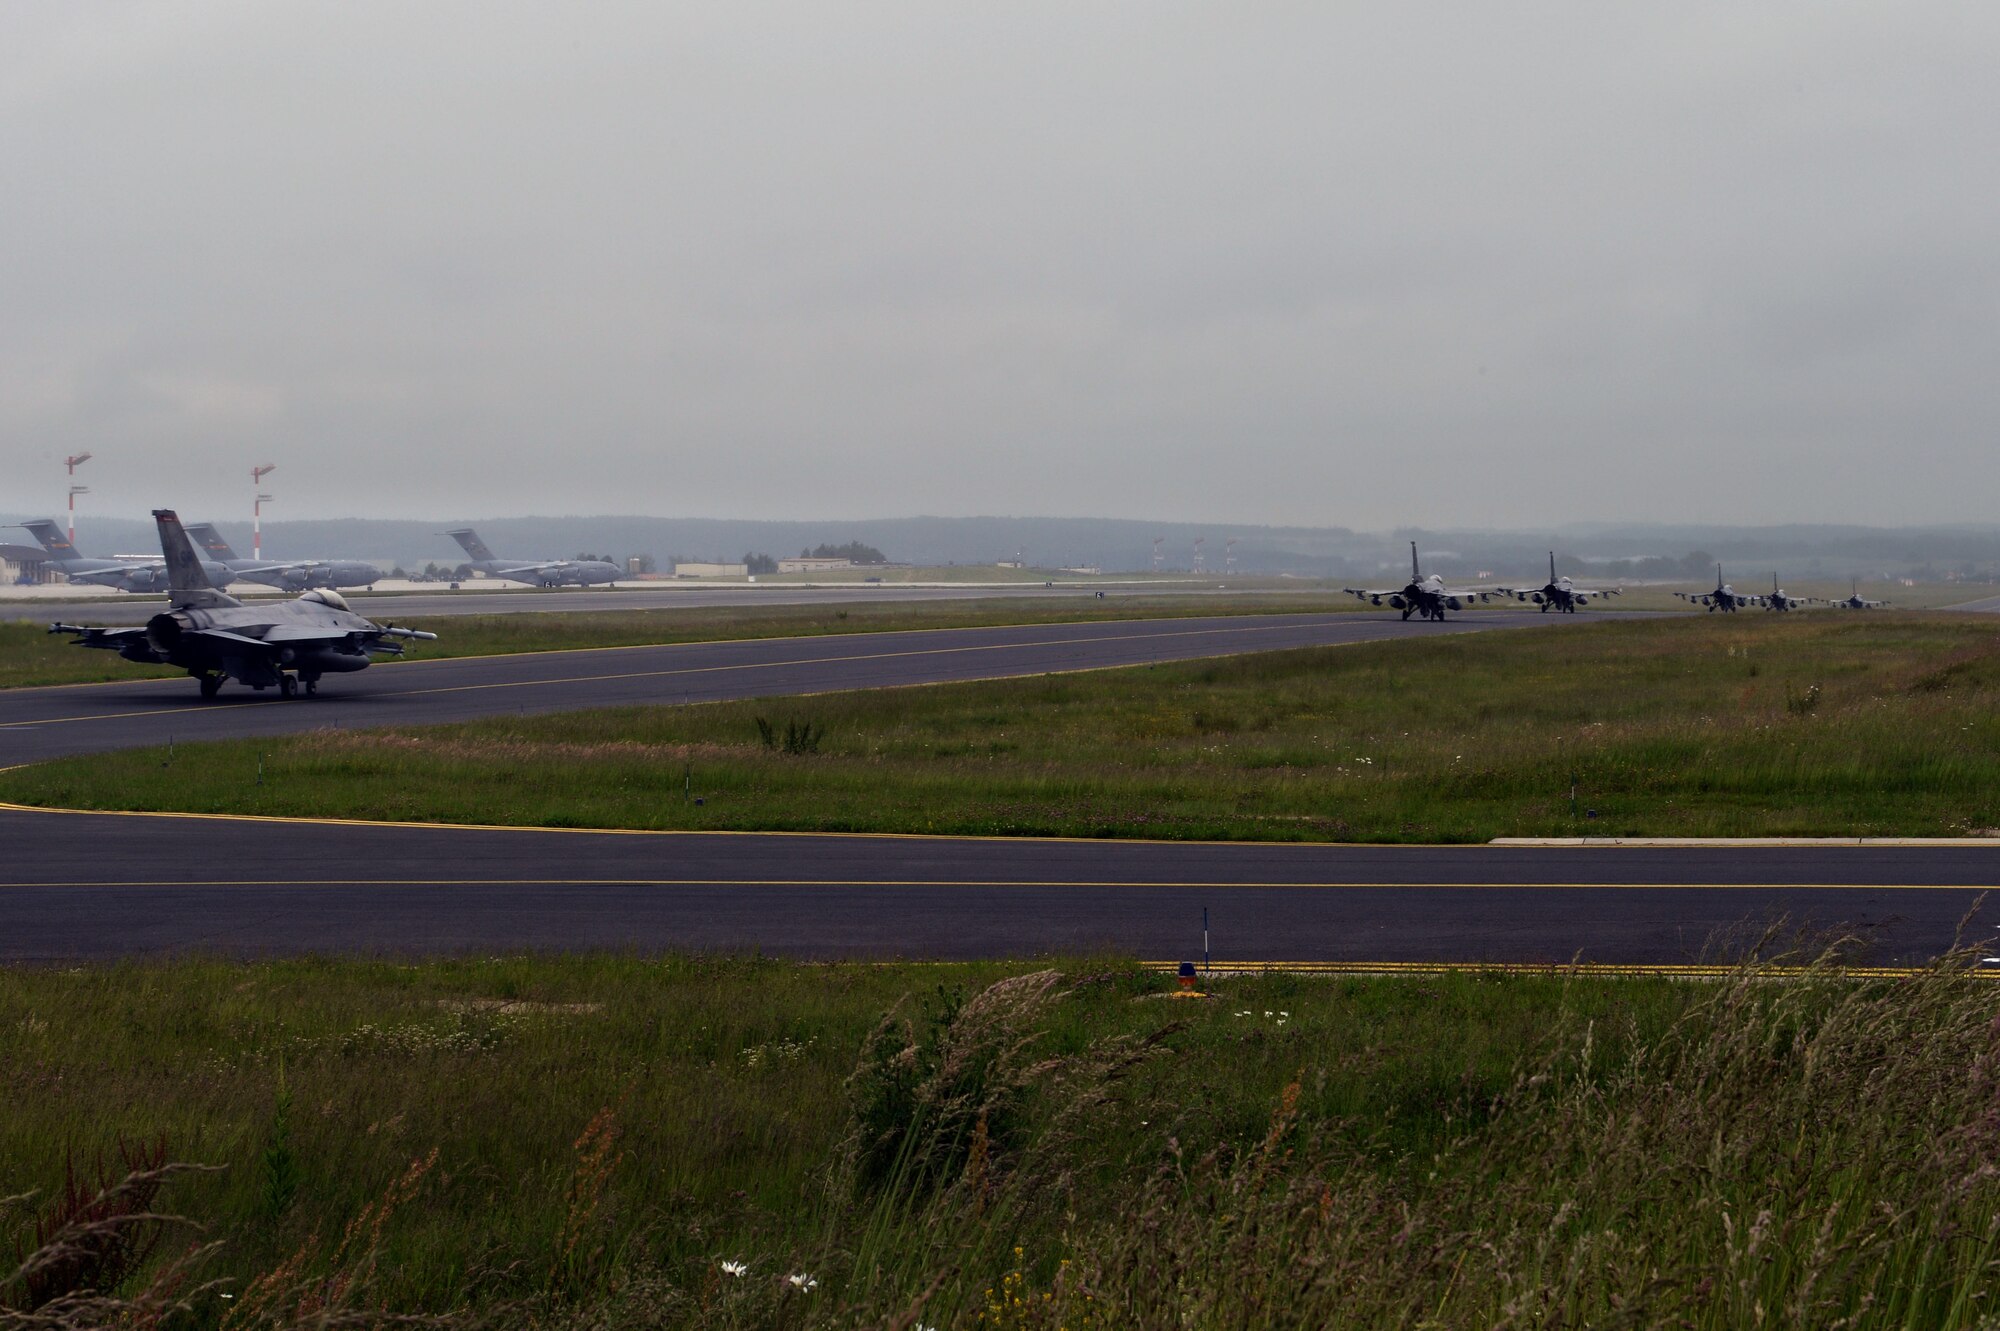 U.S. Air Force F-16 Fighter Falcon fighter aircraft taxi down the runway May 30, 2014, on Spangdahlem Air Base, Germany, before departing for the U.S. Air Force Aviation Detachment, Poland. This is the fourth fighter aircraft and seventh overall rotation the Av-Det has hosted. (U.S. Air Force photo/Senior Airman Alexis Siekert)